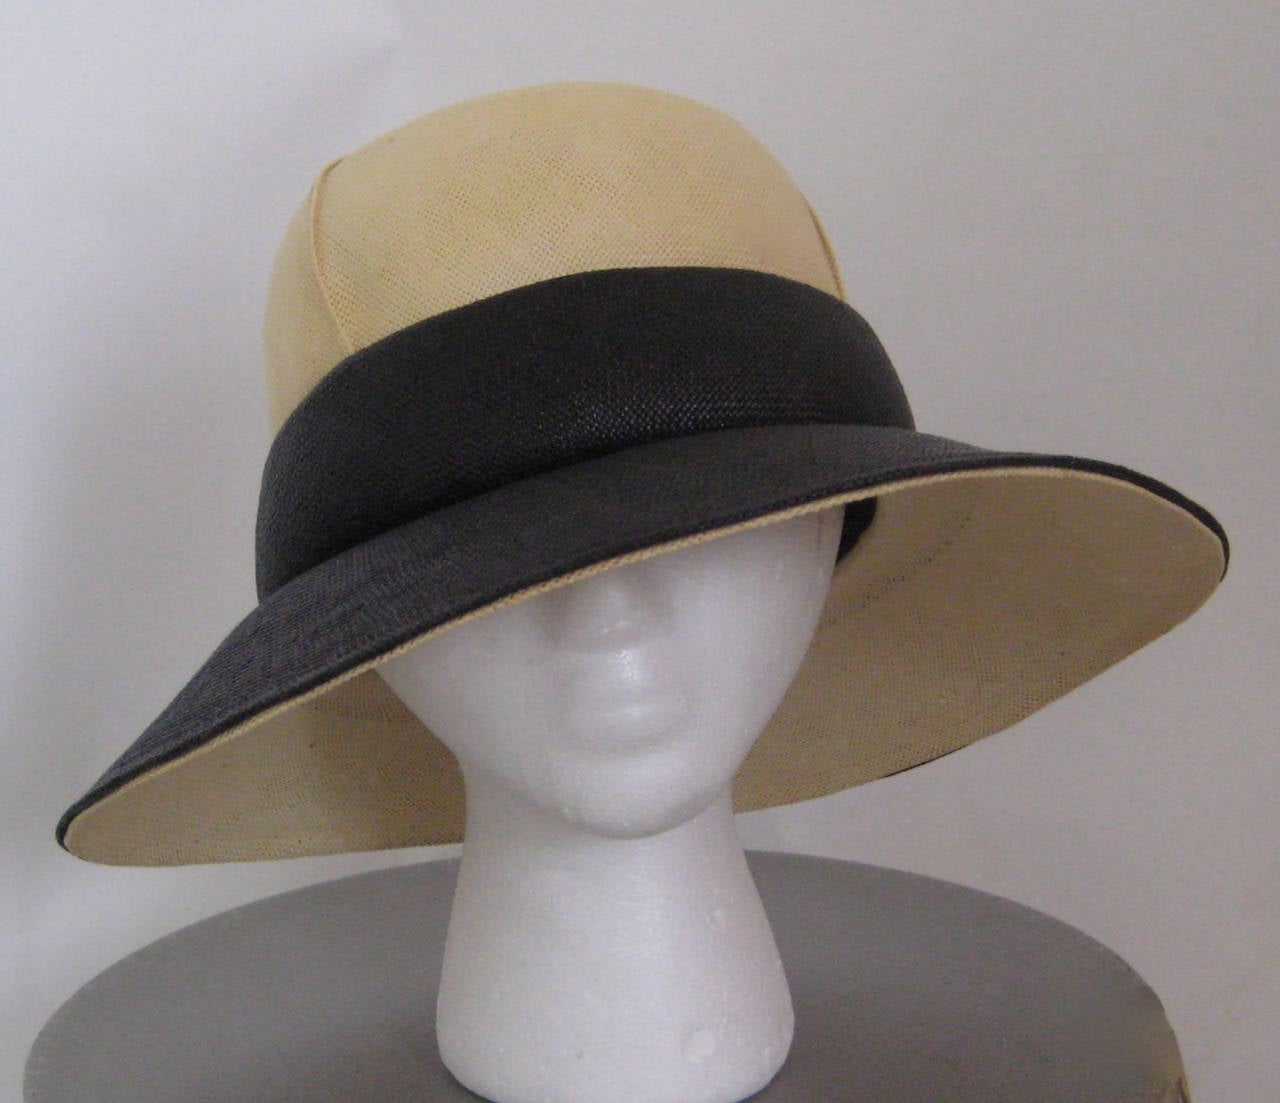 Darling 1960s Christian Dior straw hat.Wide black brim and natural color crown.Interior grosgrain petersham and elastic chin strap.There is some color variation to the natural straw crown but this is most likely original to the piece and it does not